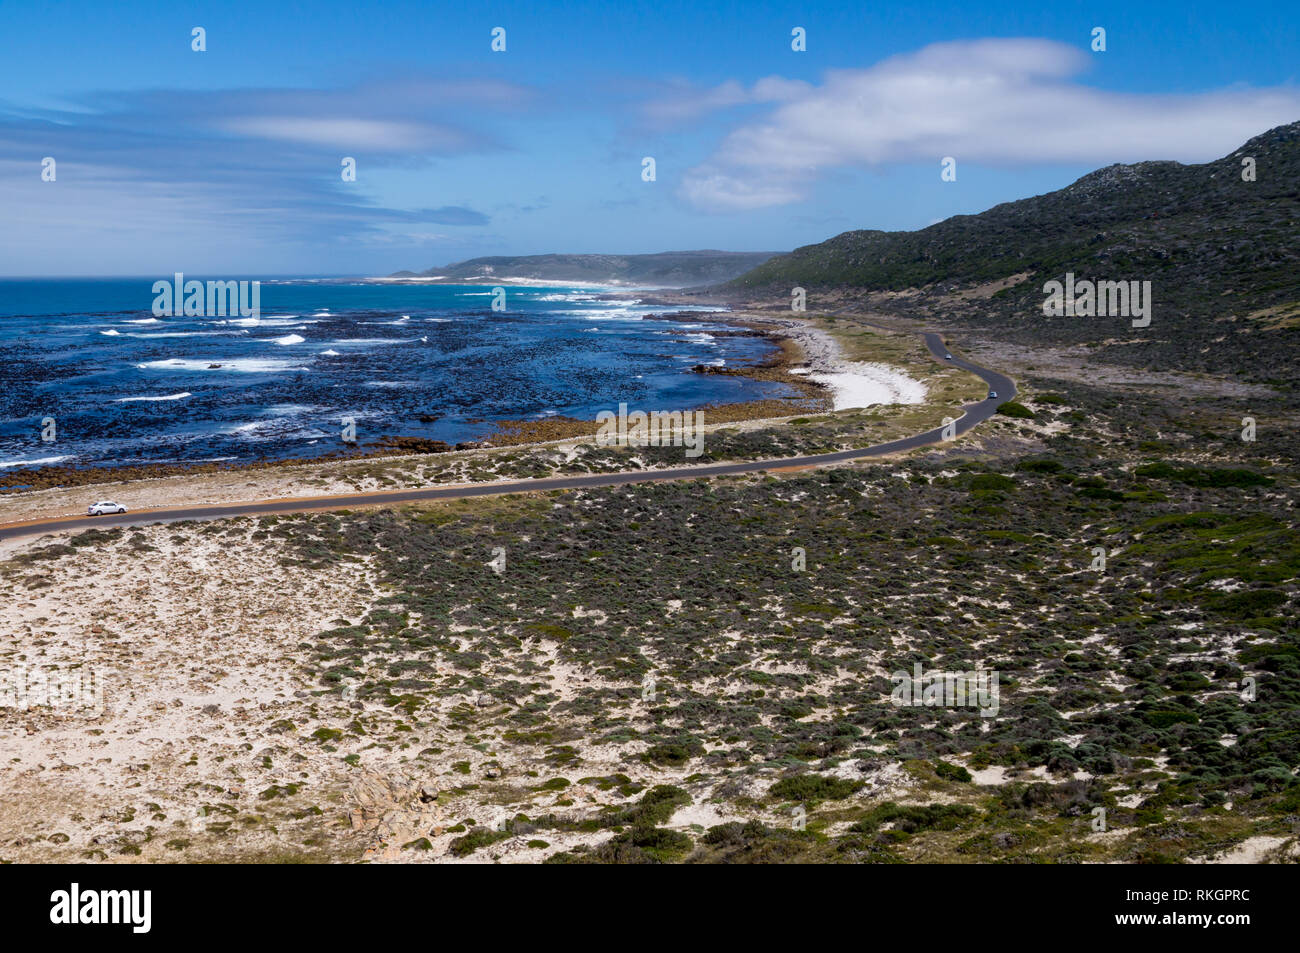 Aerial view on the ocean and mountain roads from Cape of Good Hope, South Africa. Stock Photo